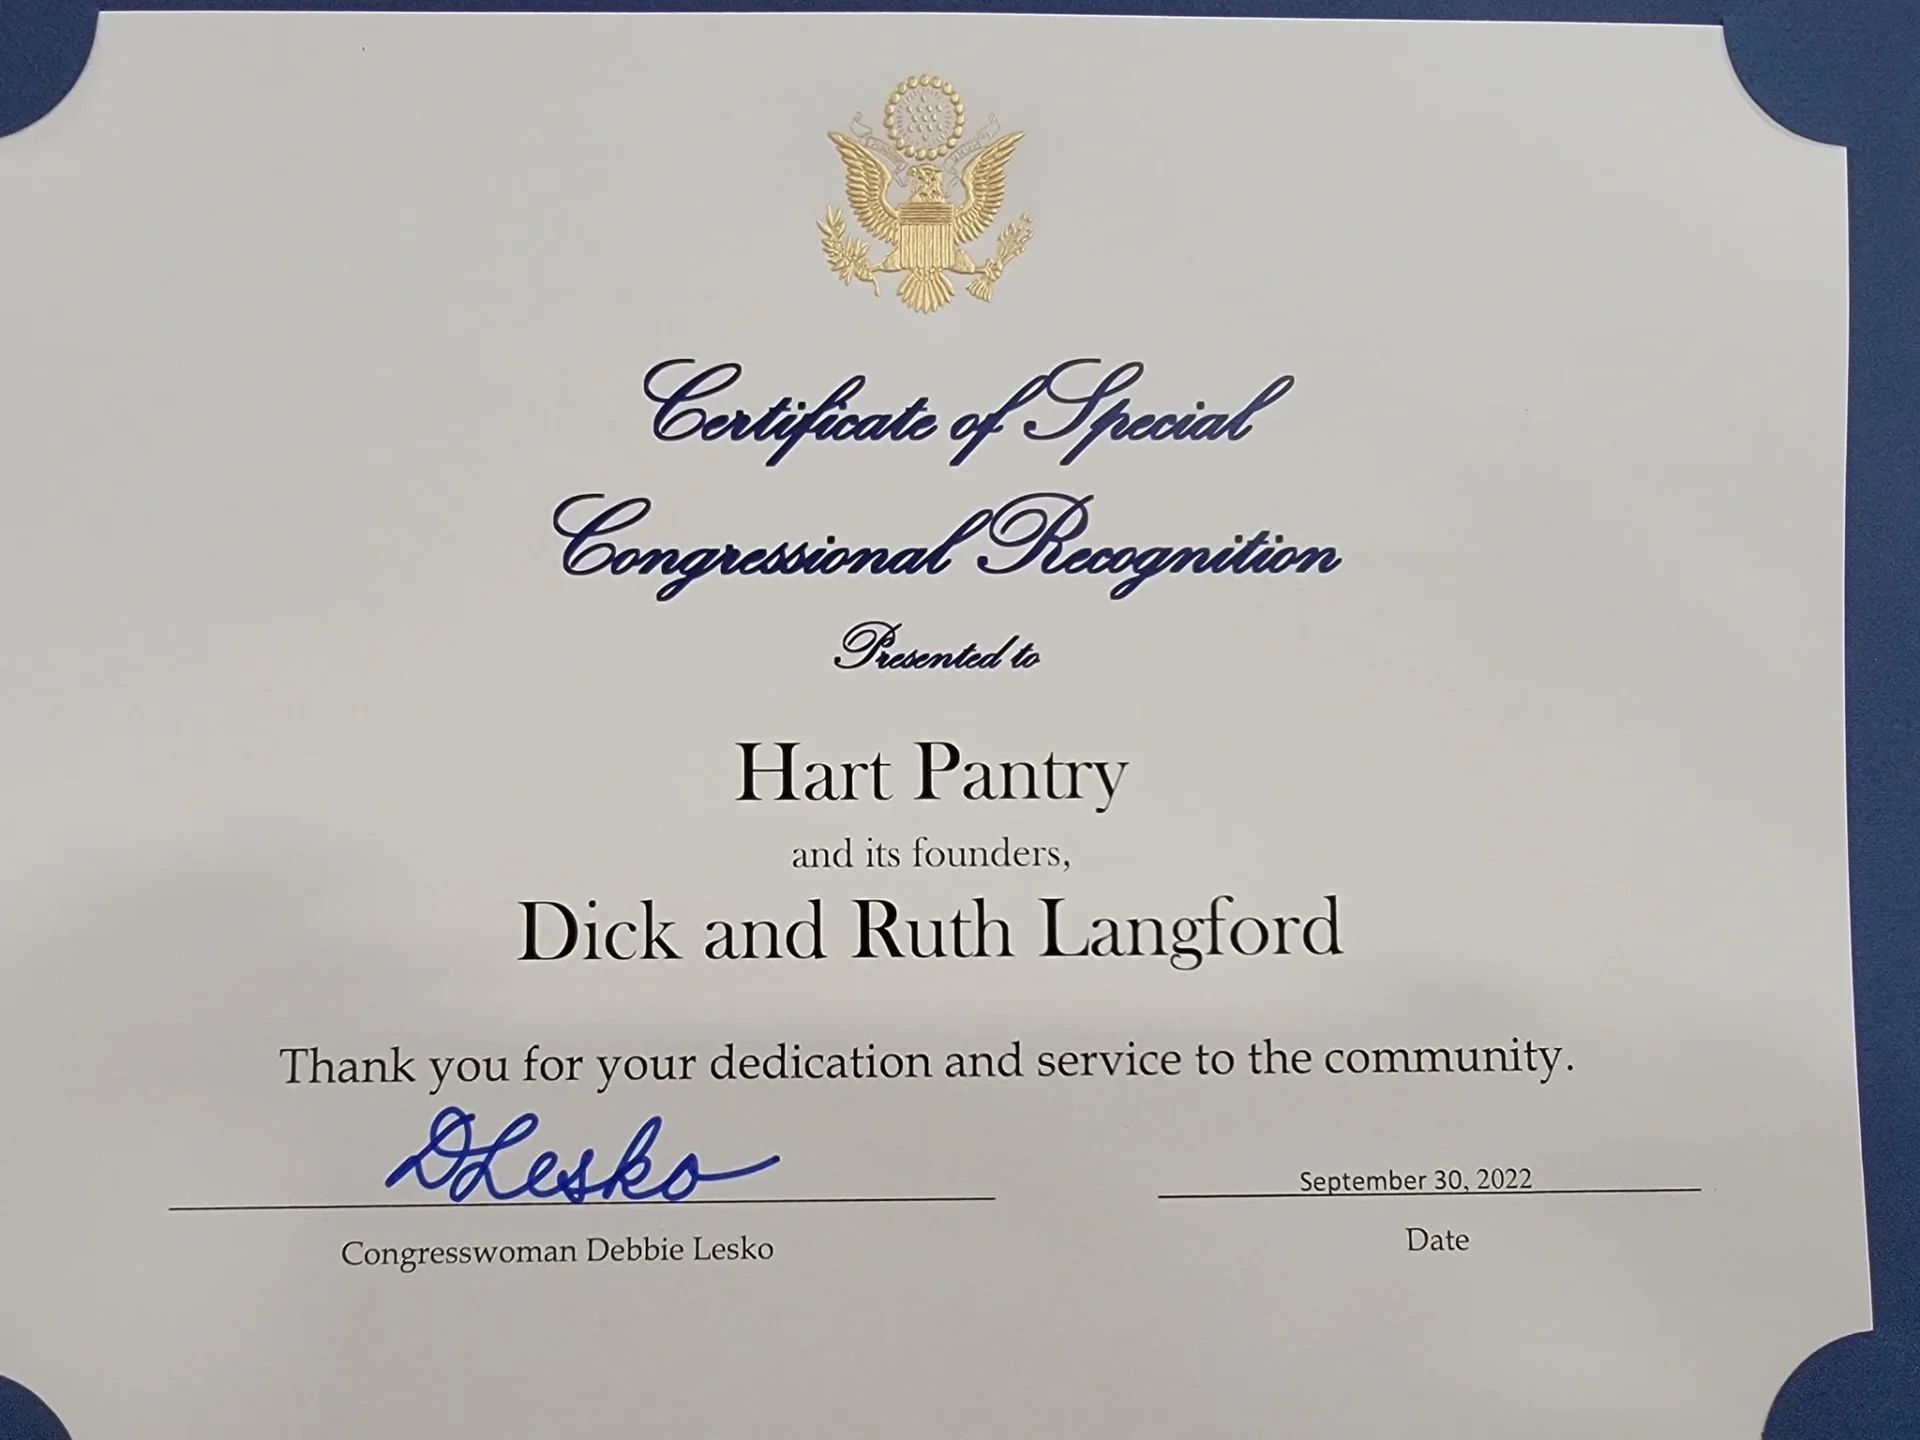 A certificate of special congressional recognition for hart pantry and its founders.